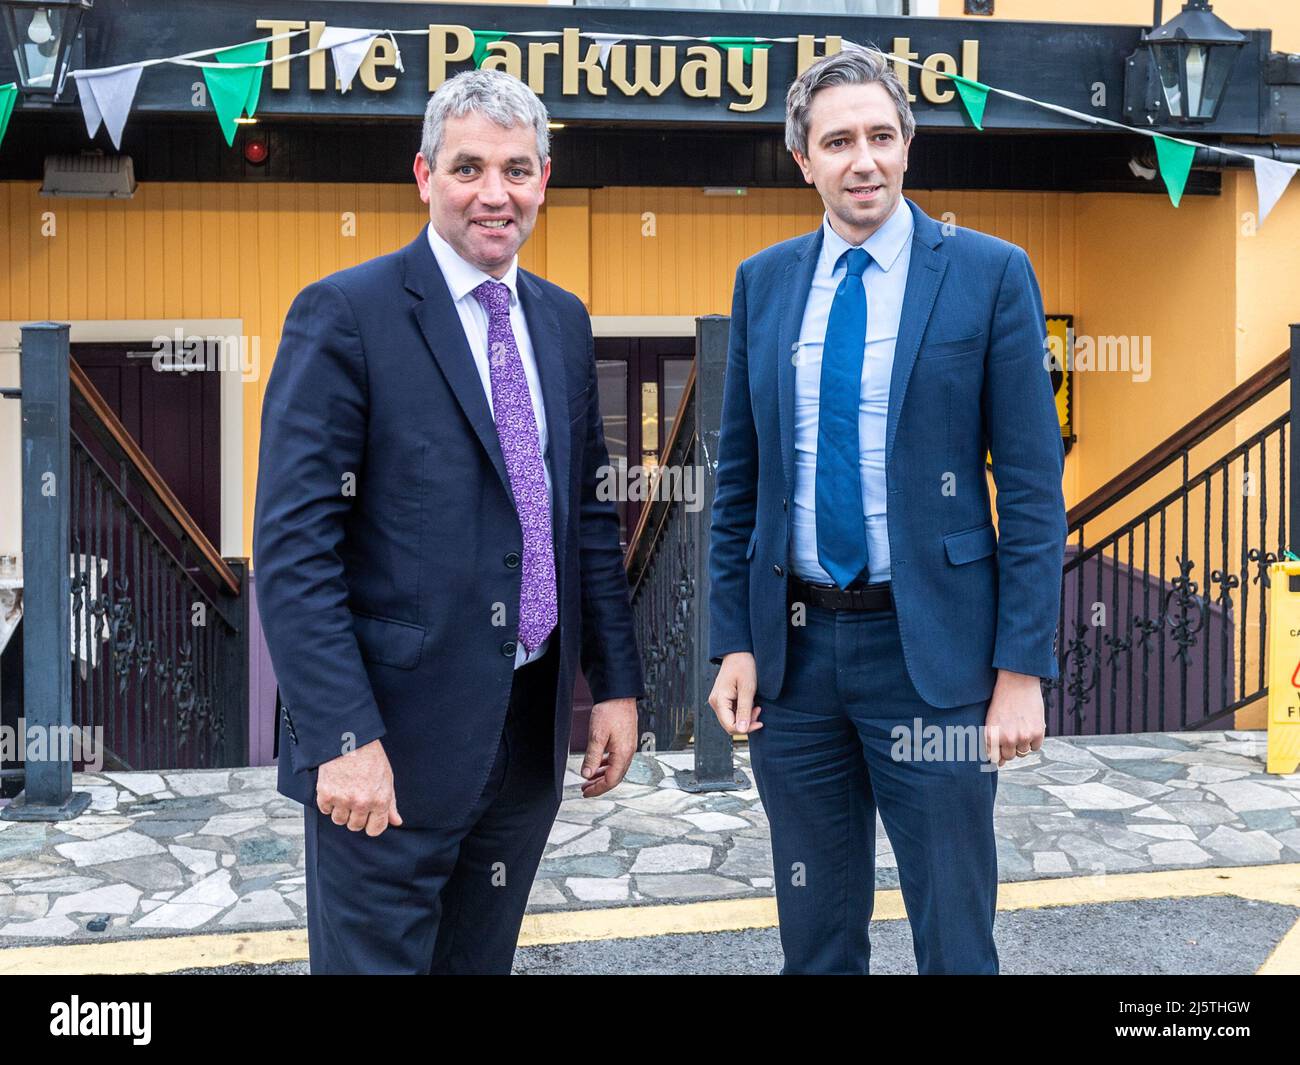 Dunmanway, West Cork, Ireland. 25th Apr, 2022. Minister Simon Harris TD chaired the Cork South West Fine Gael AGM tonight, which was the first in person AGM for the organisation in over two years. Senator Tim Lombard also attended the meeting. Credit: AG News/Alamy Live News Stock Photo